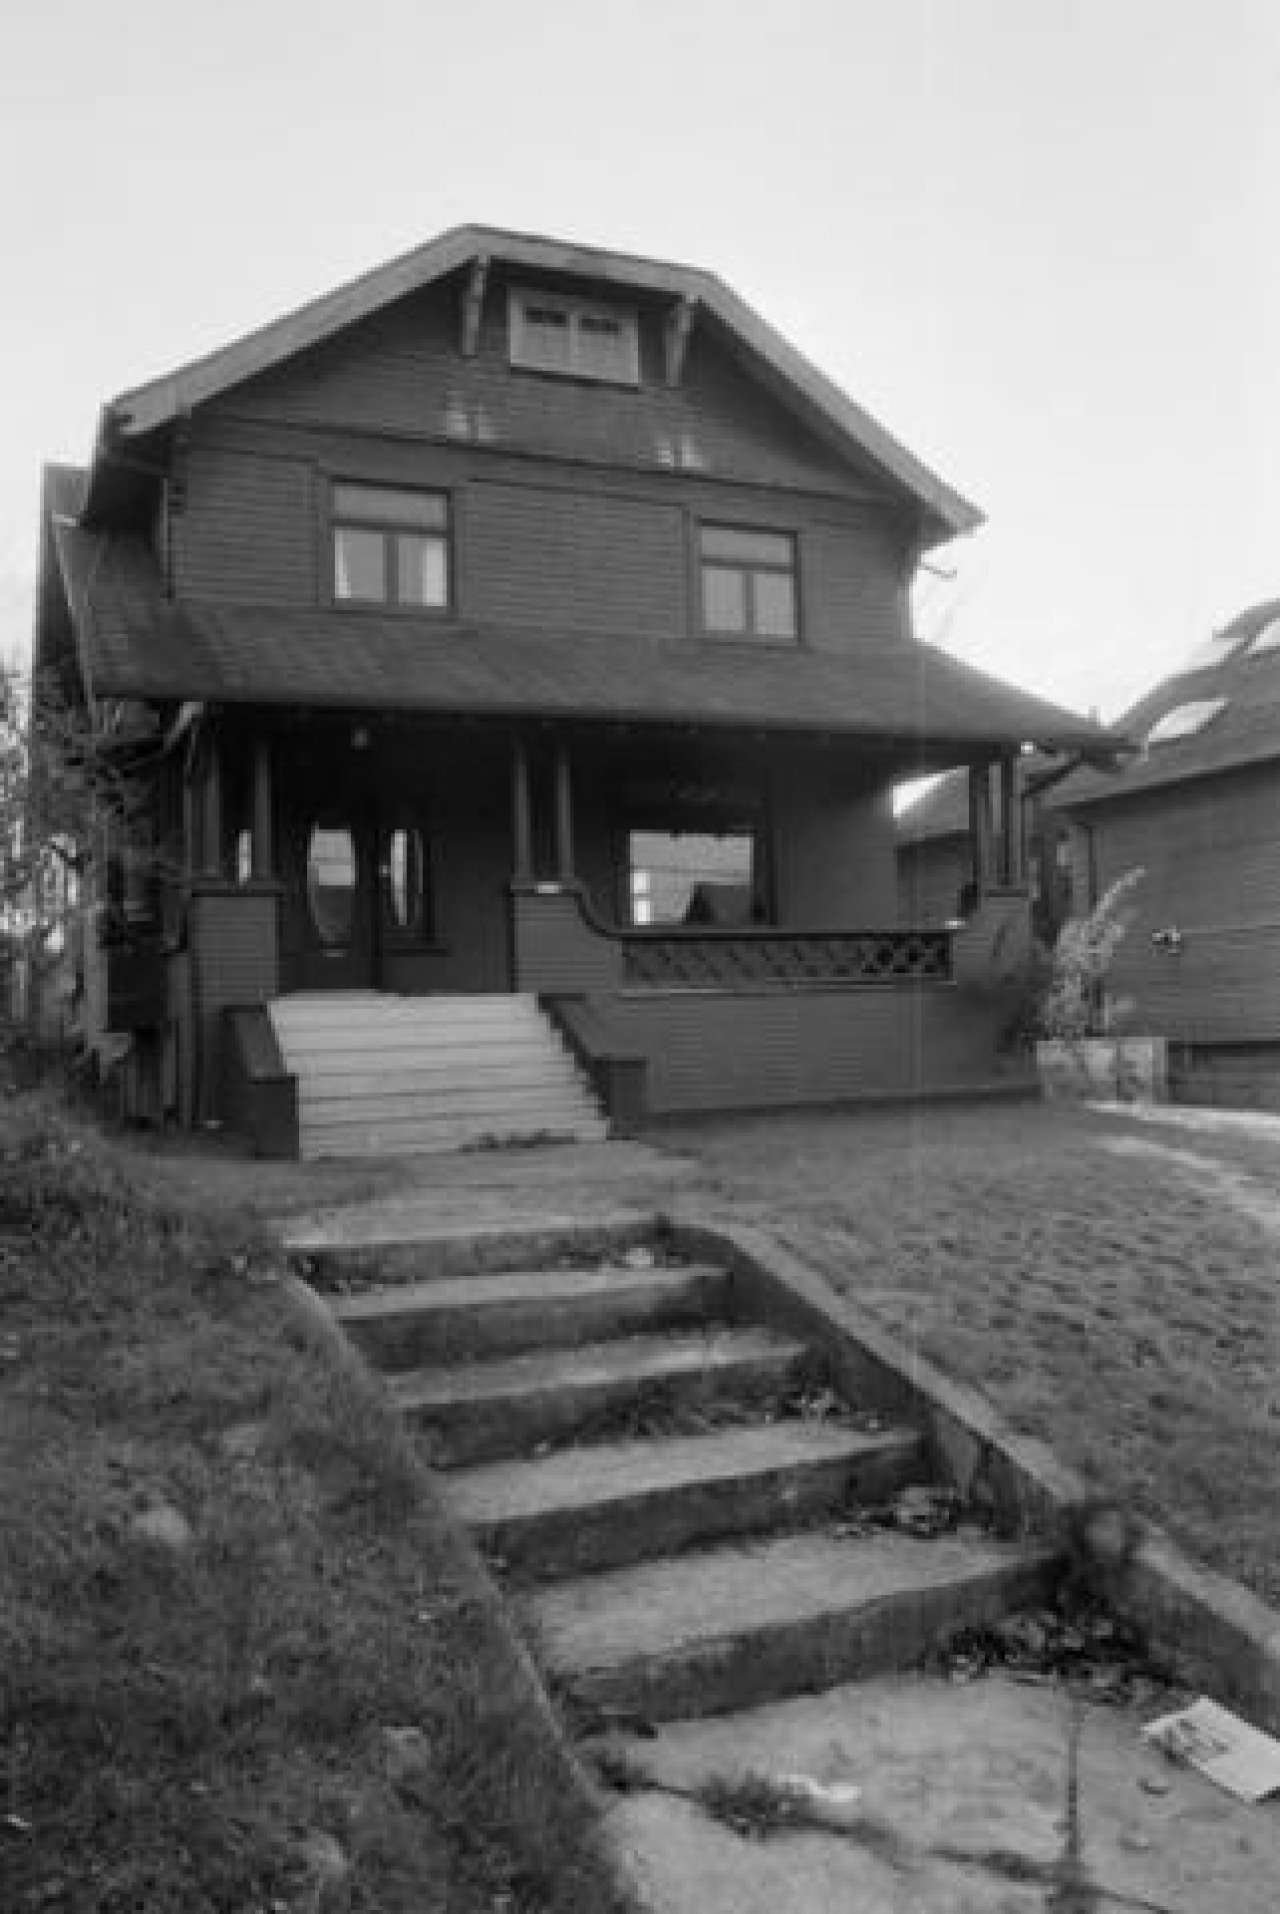 2650 West 1st Avenue c. 1985
Source: City of Vancouver Archives Bookmark and Share
Item : CVA 790-1473 - 2650 West 1st Avenue